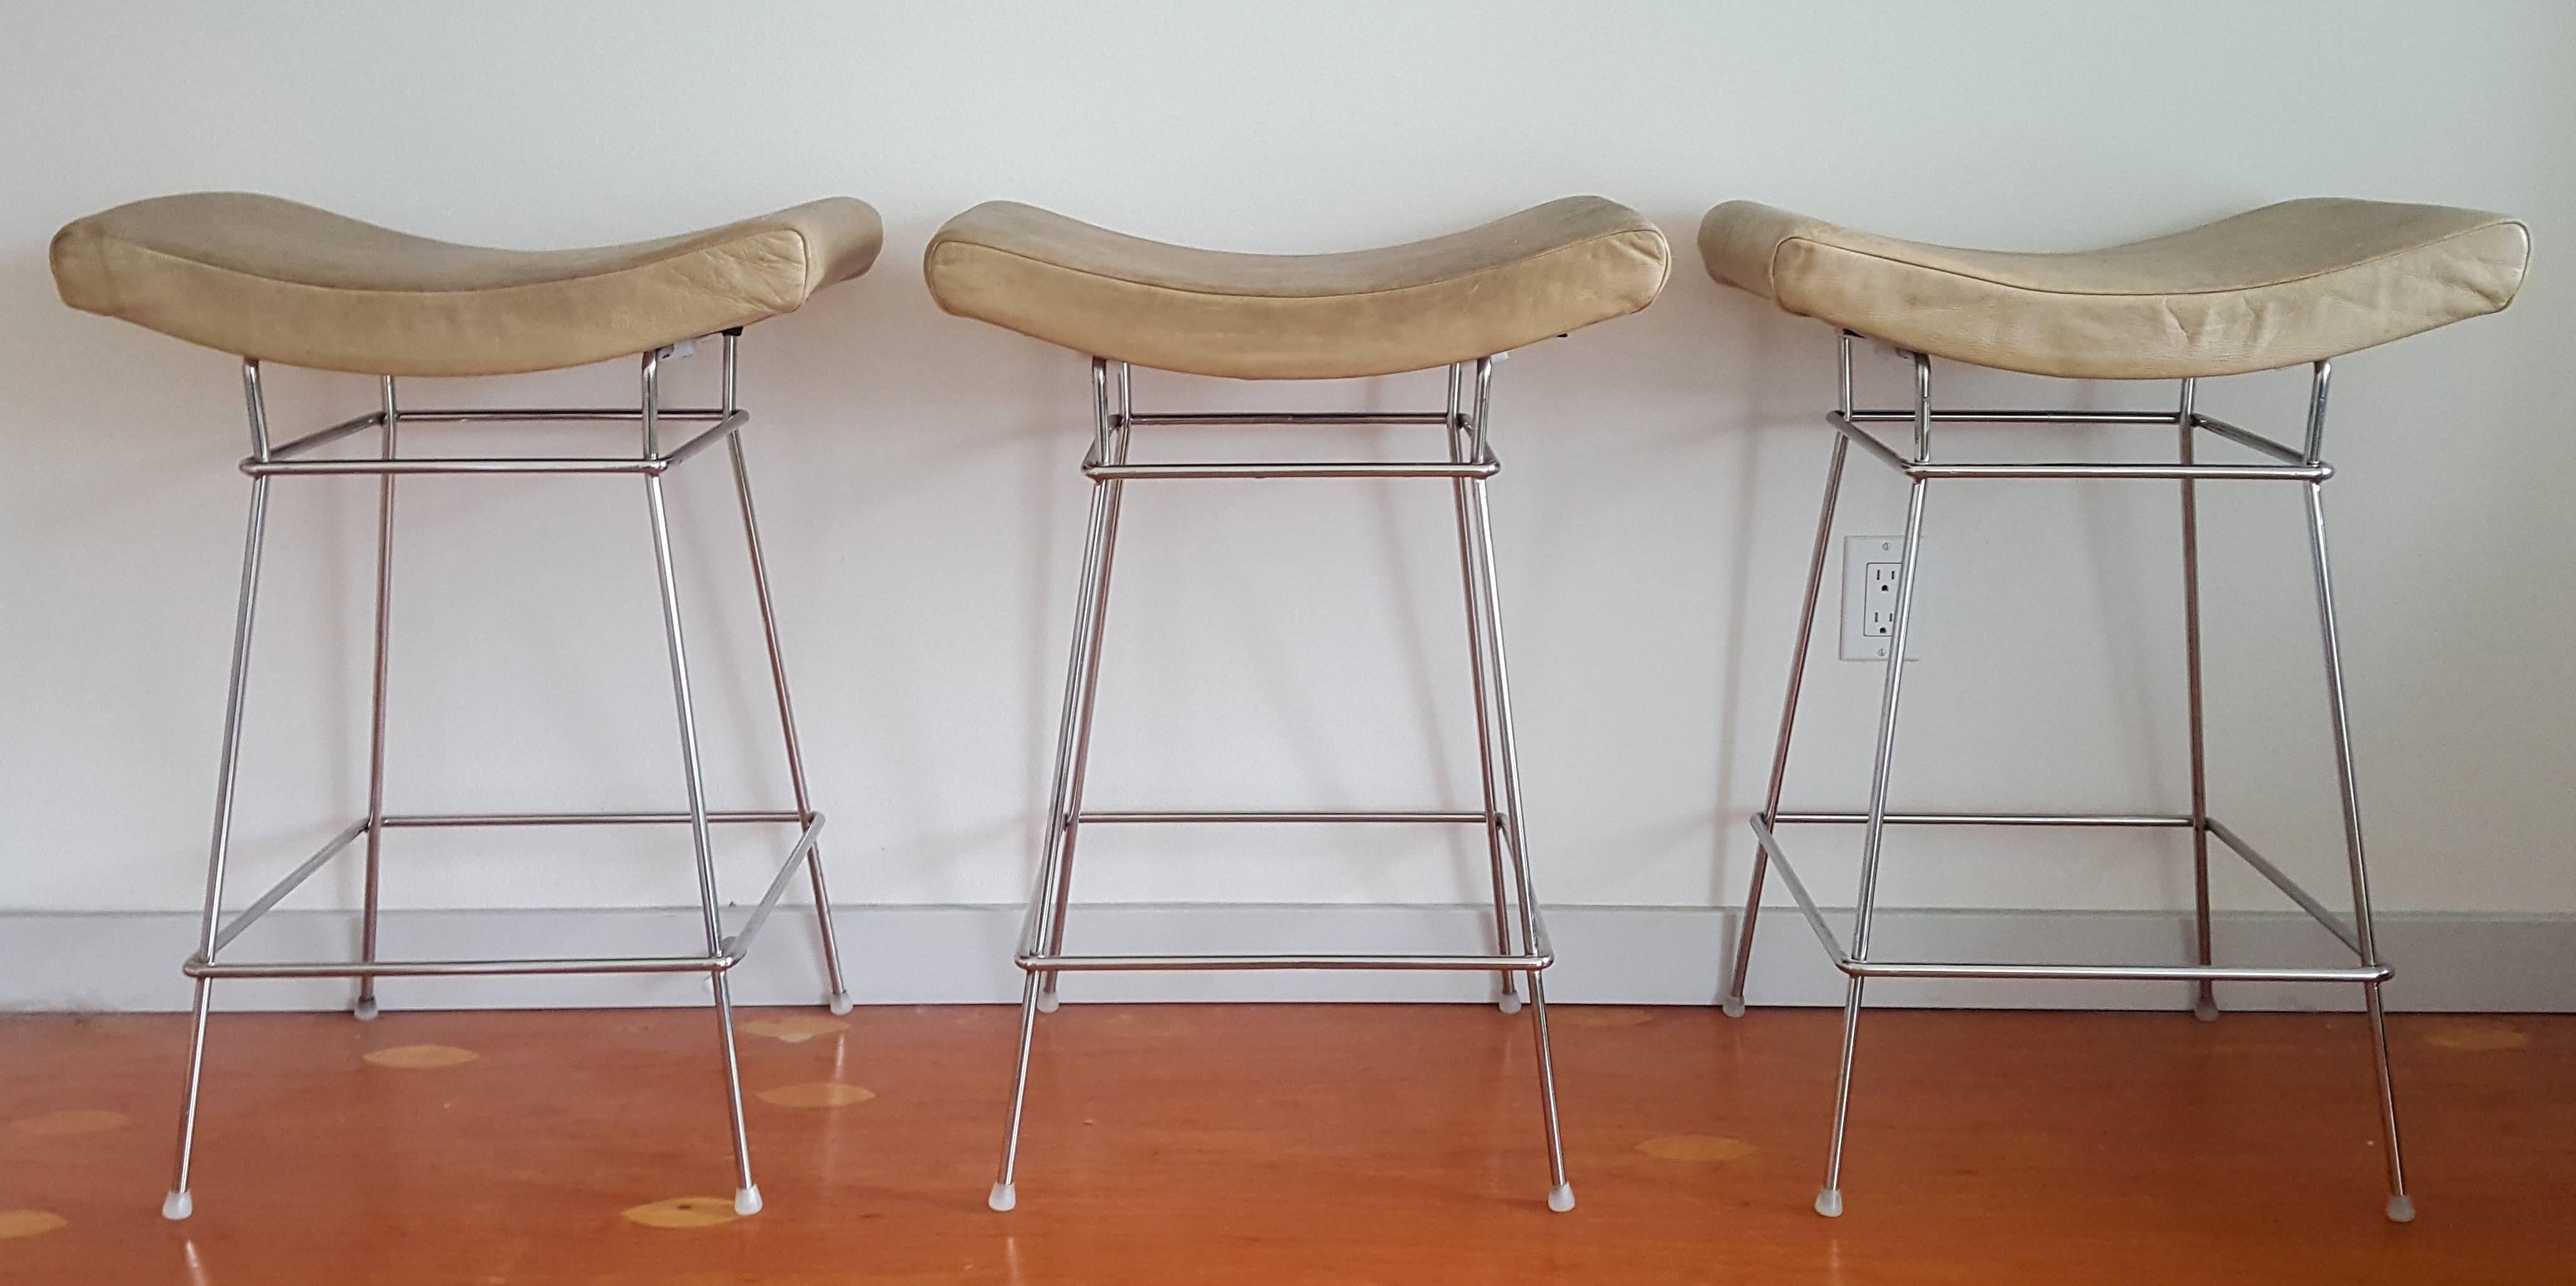 Recipient of the 2002 Brazil Faz award, these counter height bar stools have a super sleek and modern look, while also featuring an interesting distressed/antiqued leather on top. The stools chrome legs are in fantastic condition, with distressed